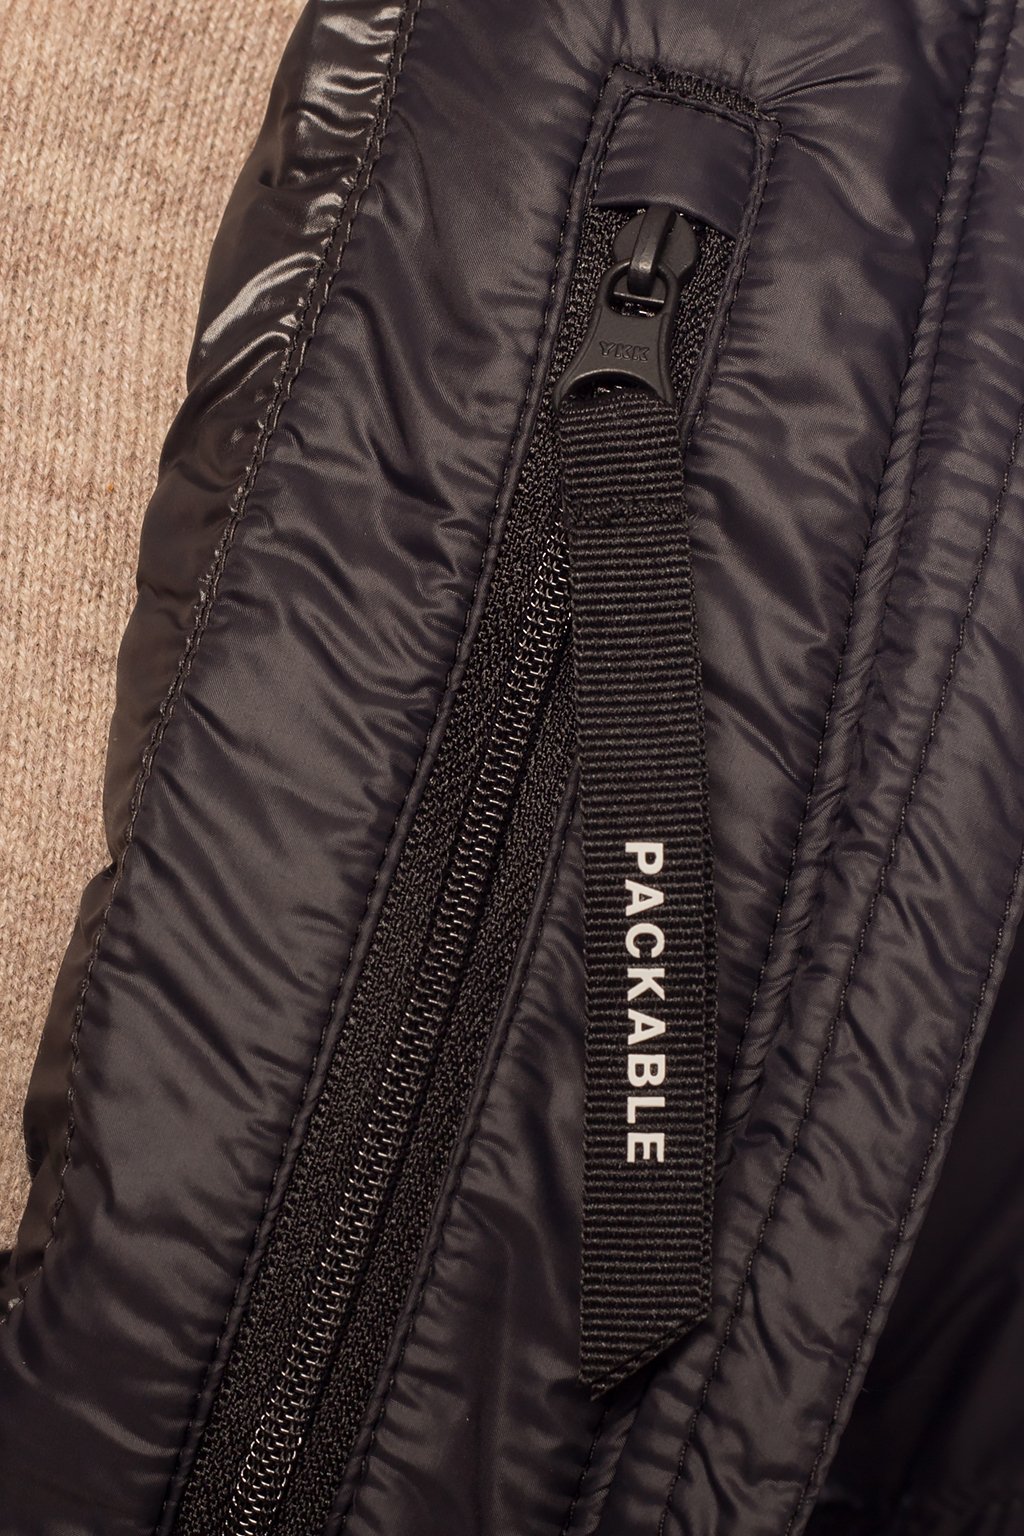 Canada Goose ‘Abbott Hoody’ quilted jacket